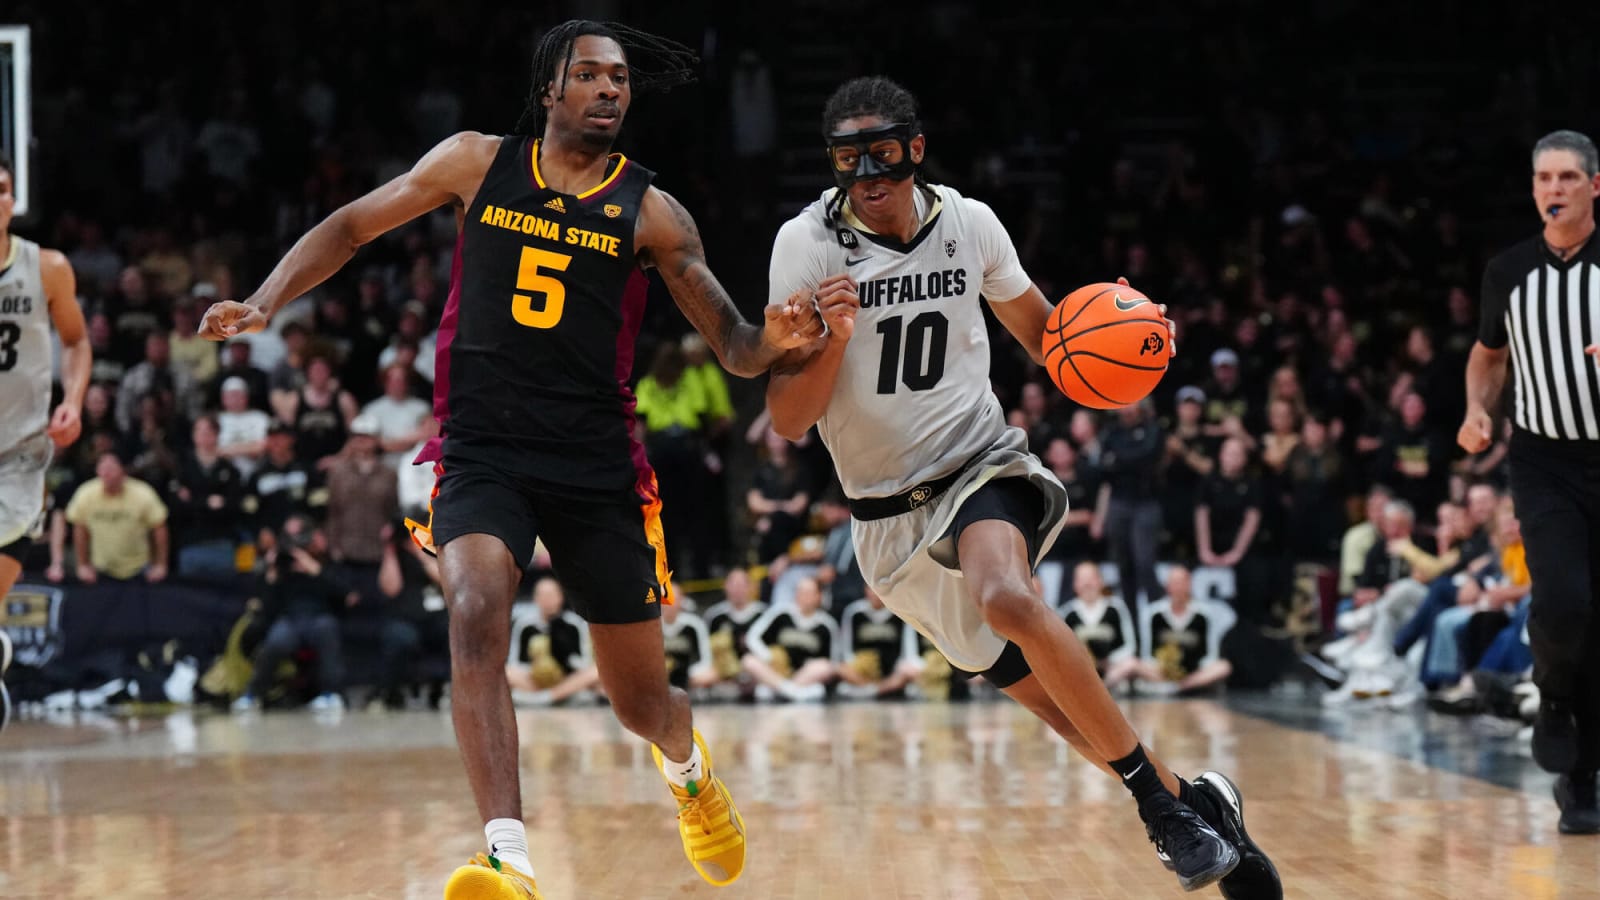 NCAAB betting: Top games for the weekend